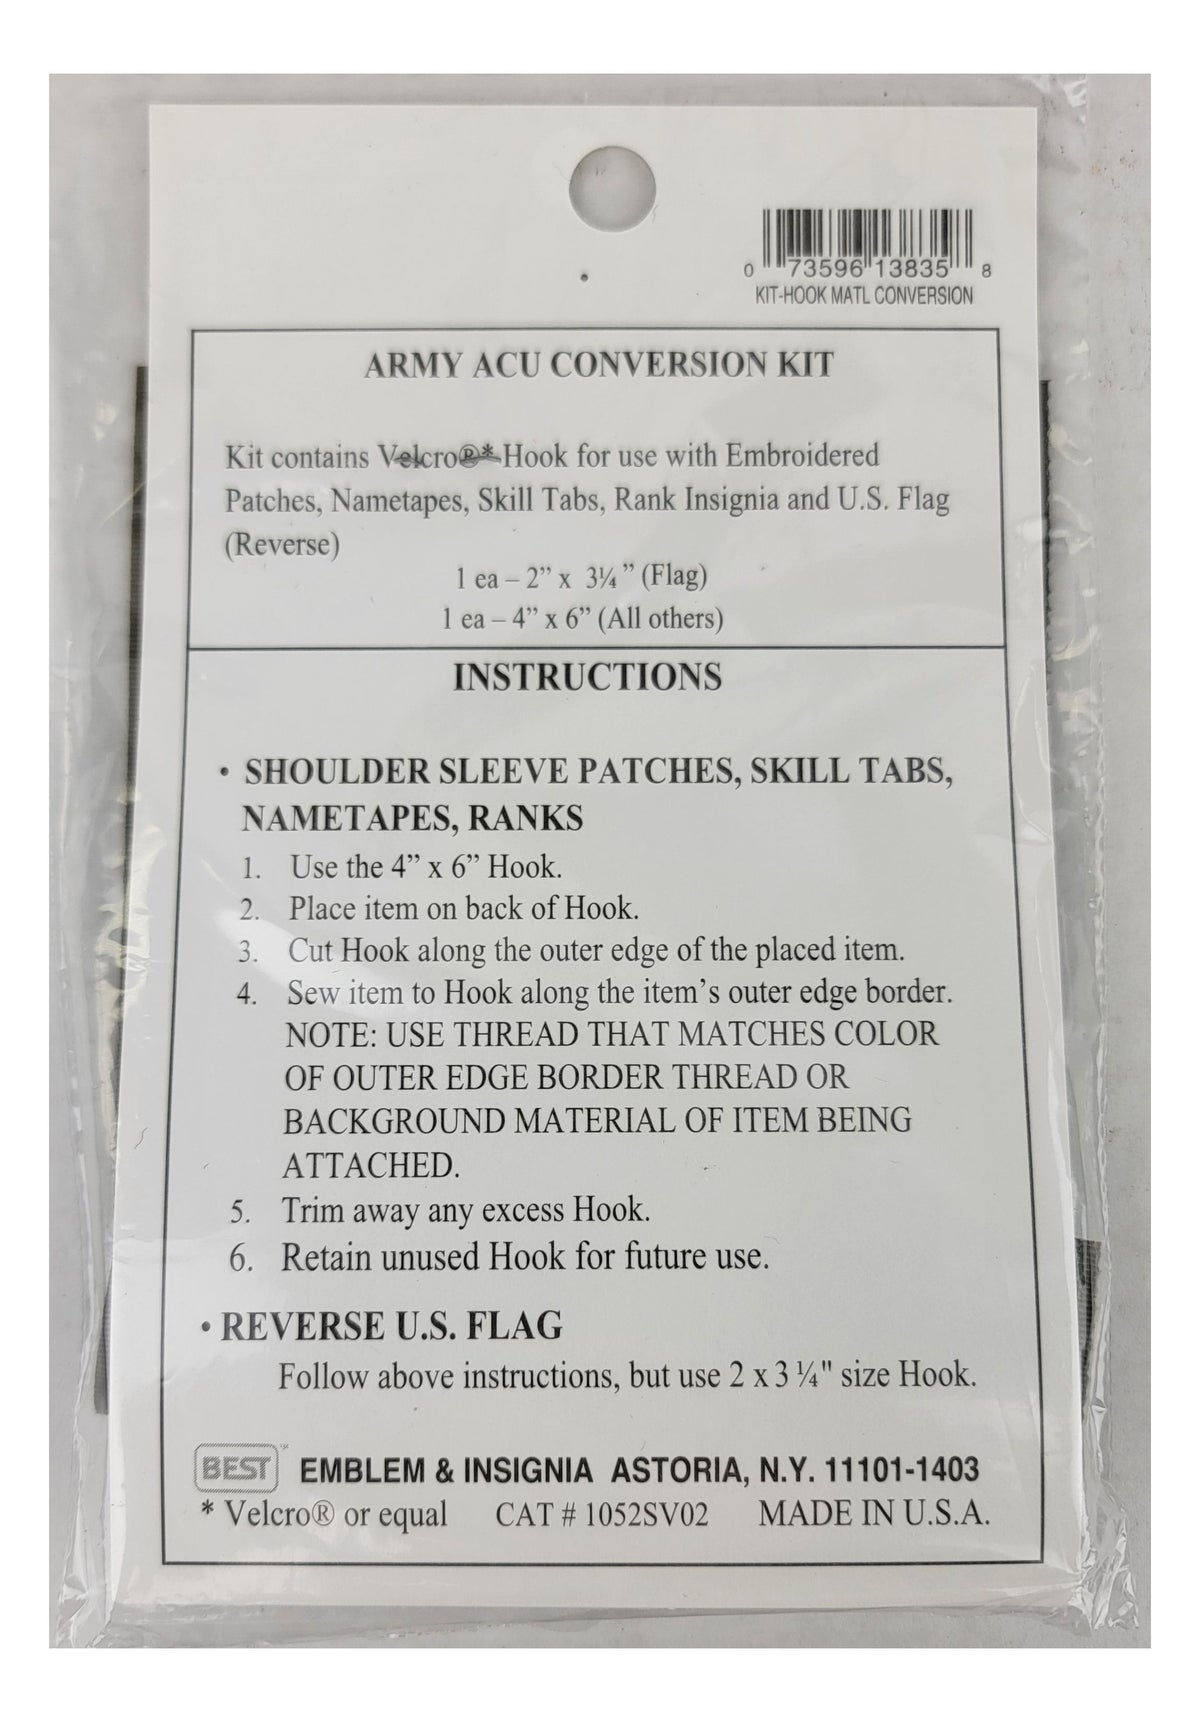 CLEARANCE - Military Surplus Army ACU Conversion Kit